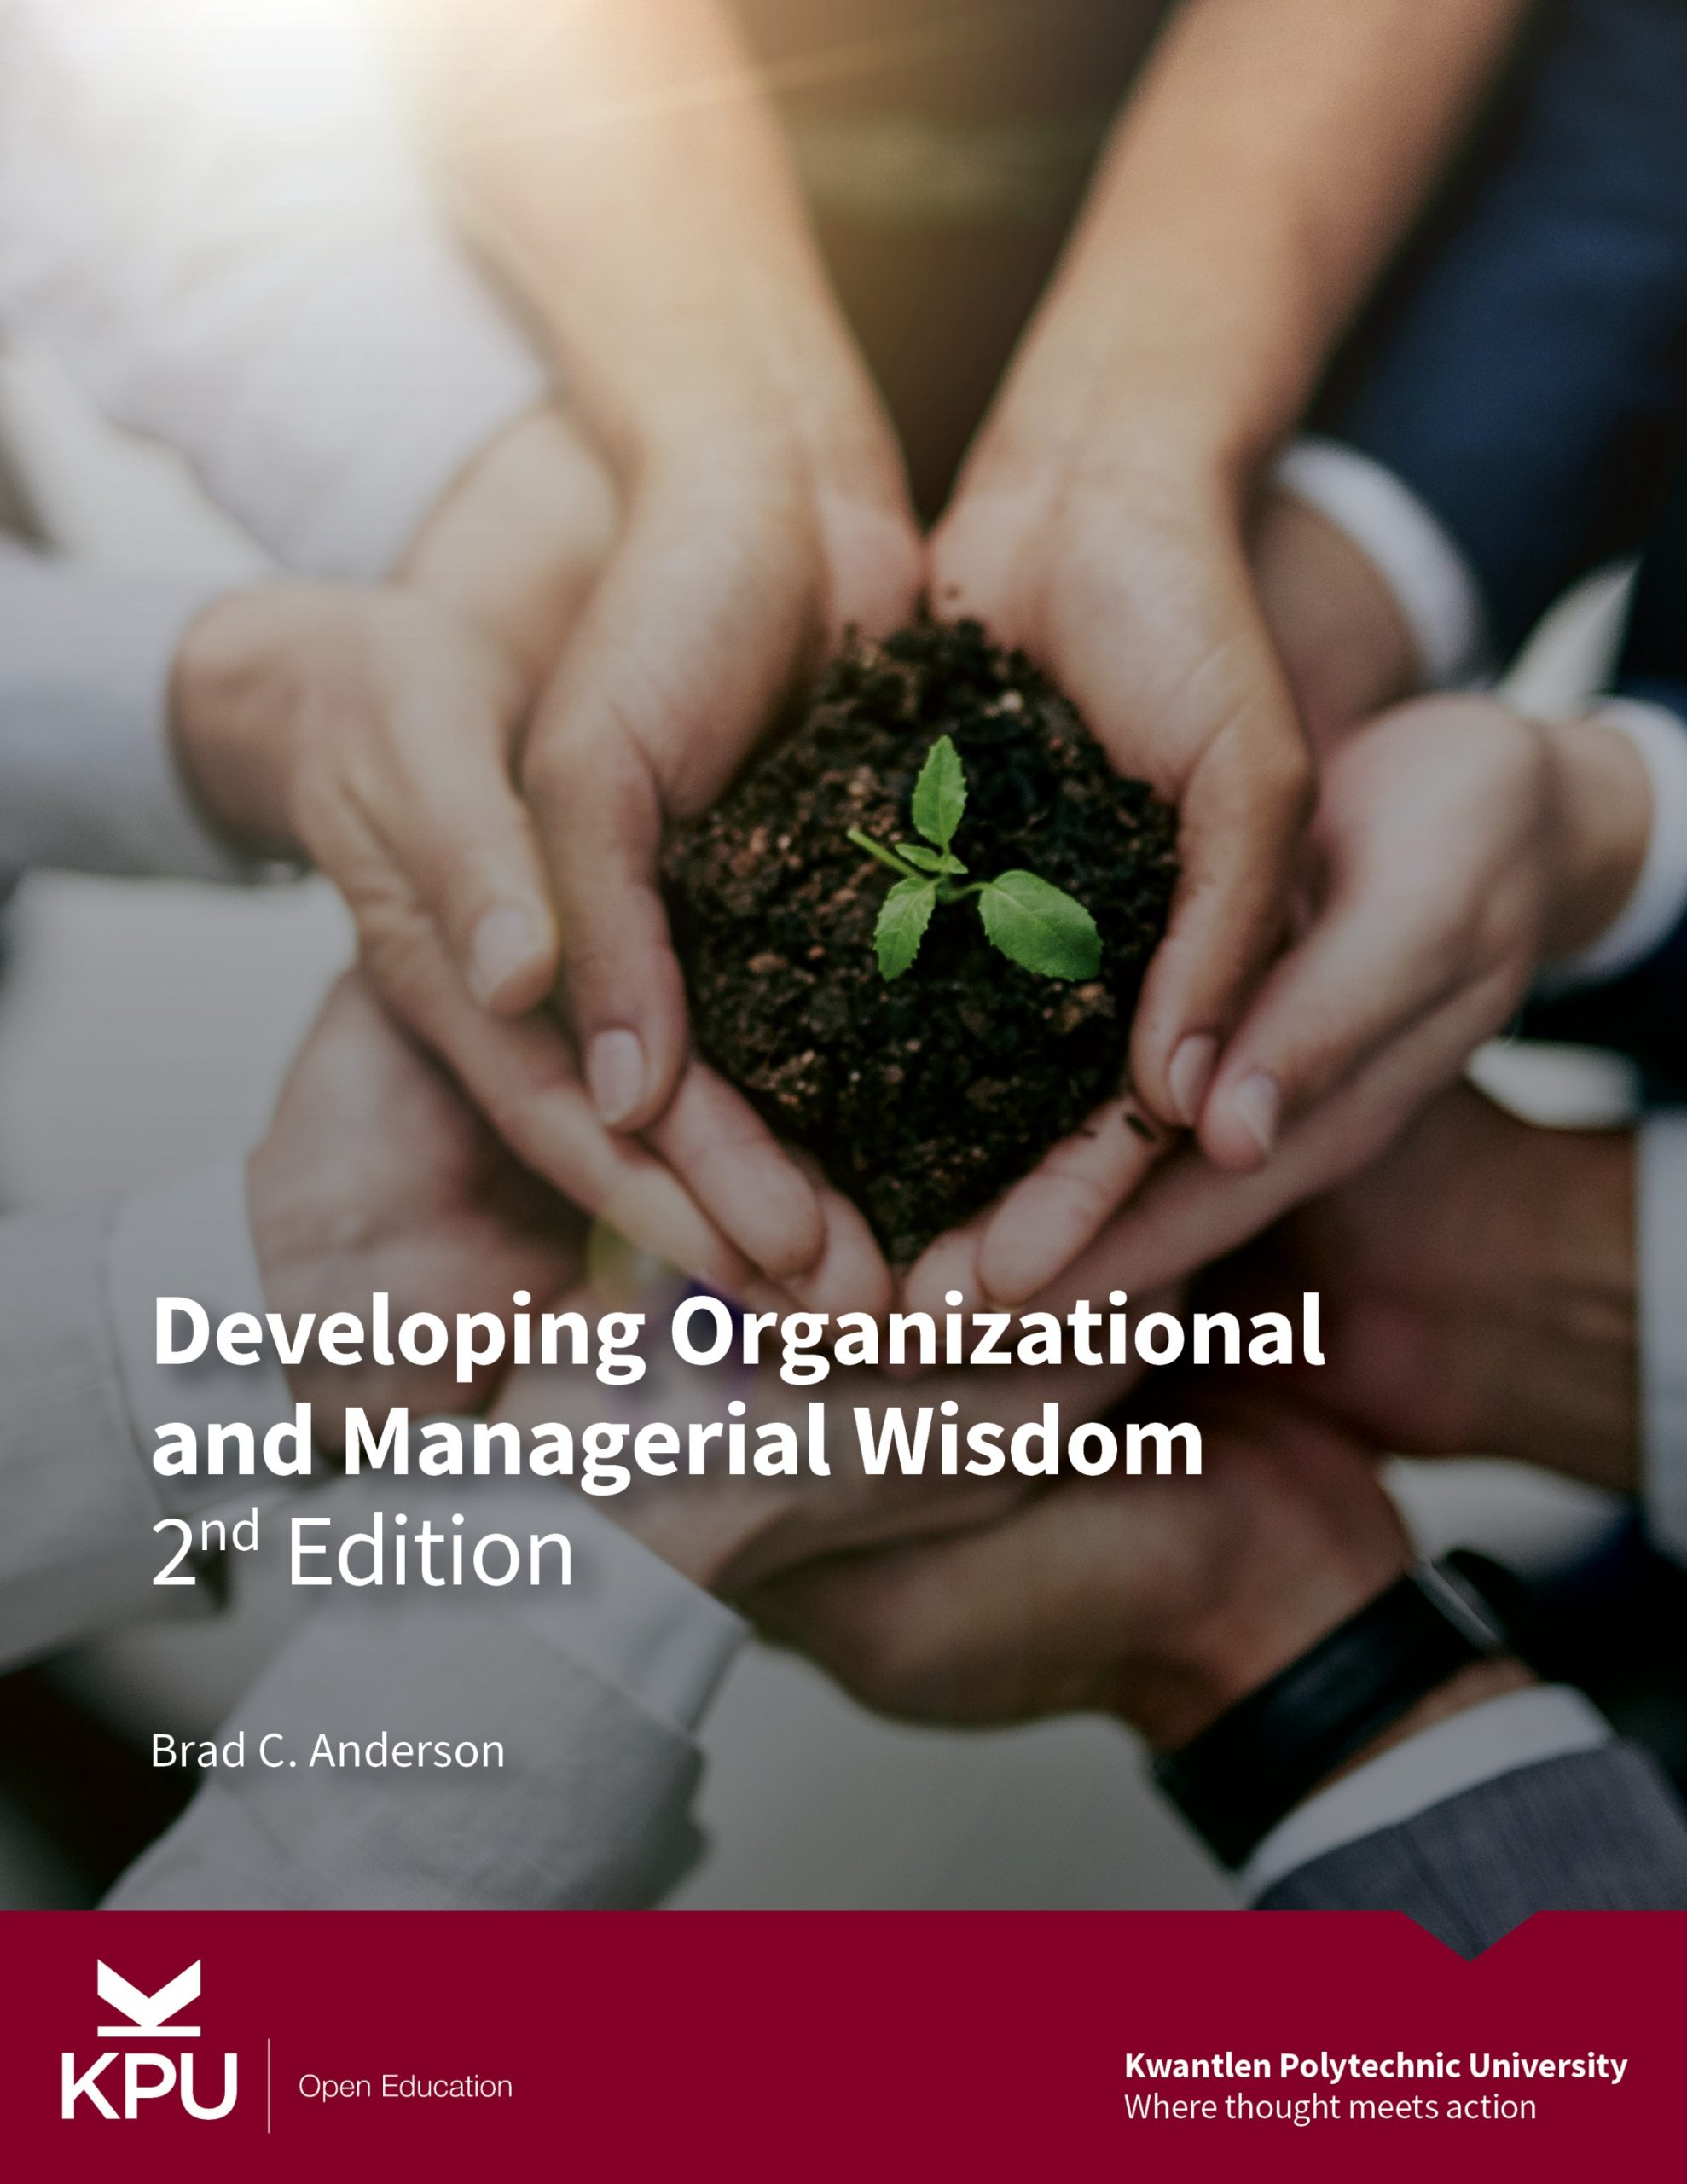 Cover image for Developing Organizational and Managerial Wisdom - 2nd Edition (Audio plus text version)